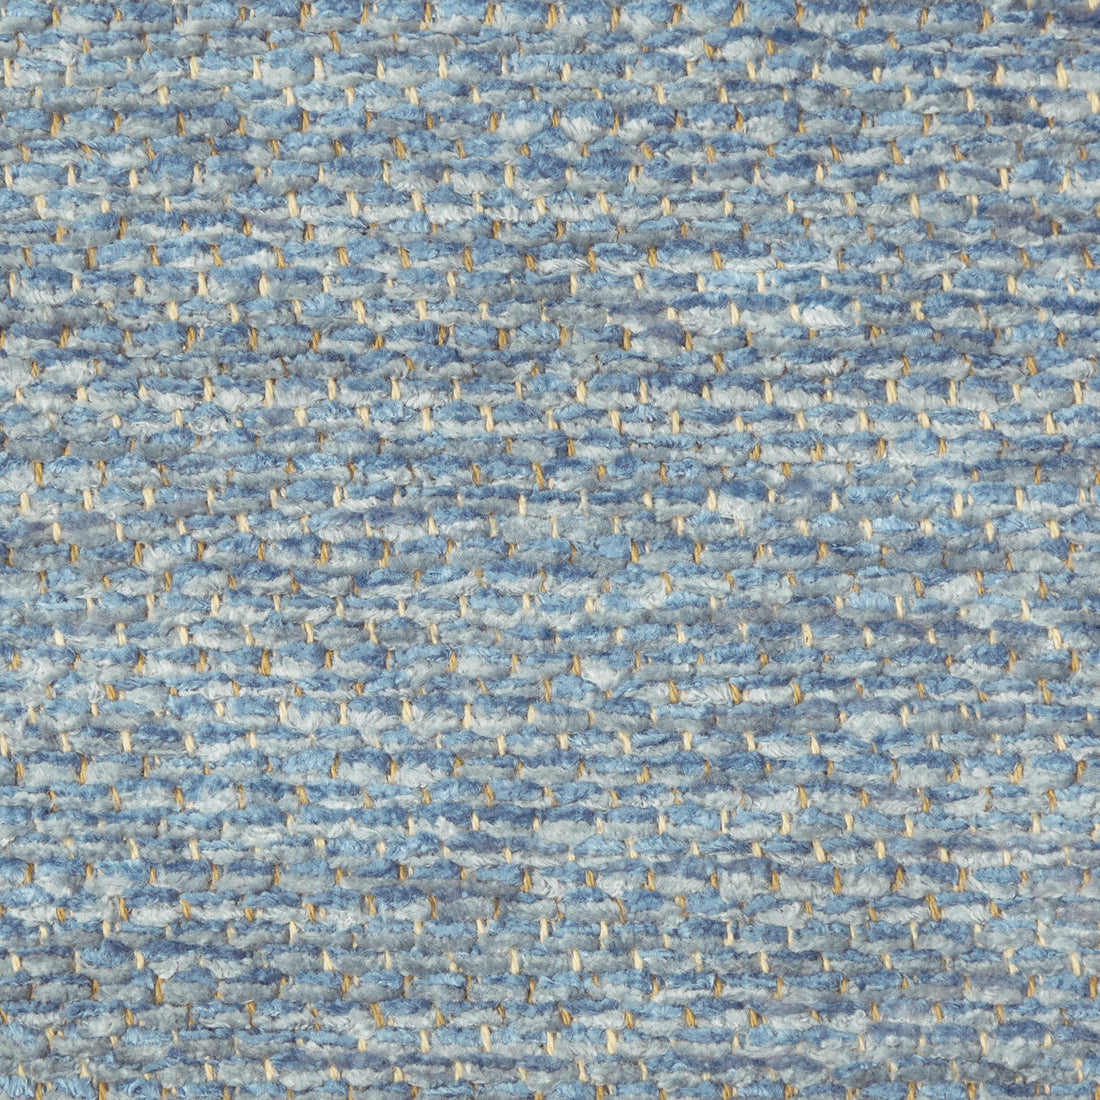 Chamoux Texture fabric in blue color - pattern 8019145.5.0 - by Brunschwig &amp; Fils in the Chambery Textures II collection